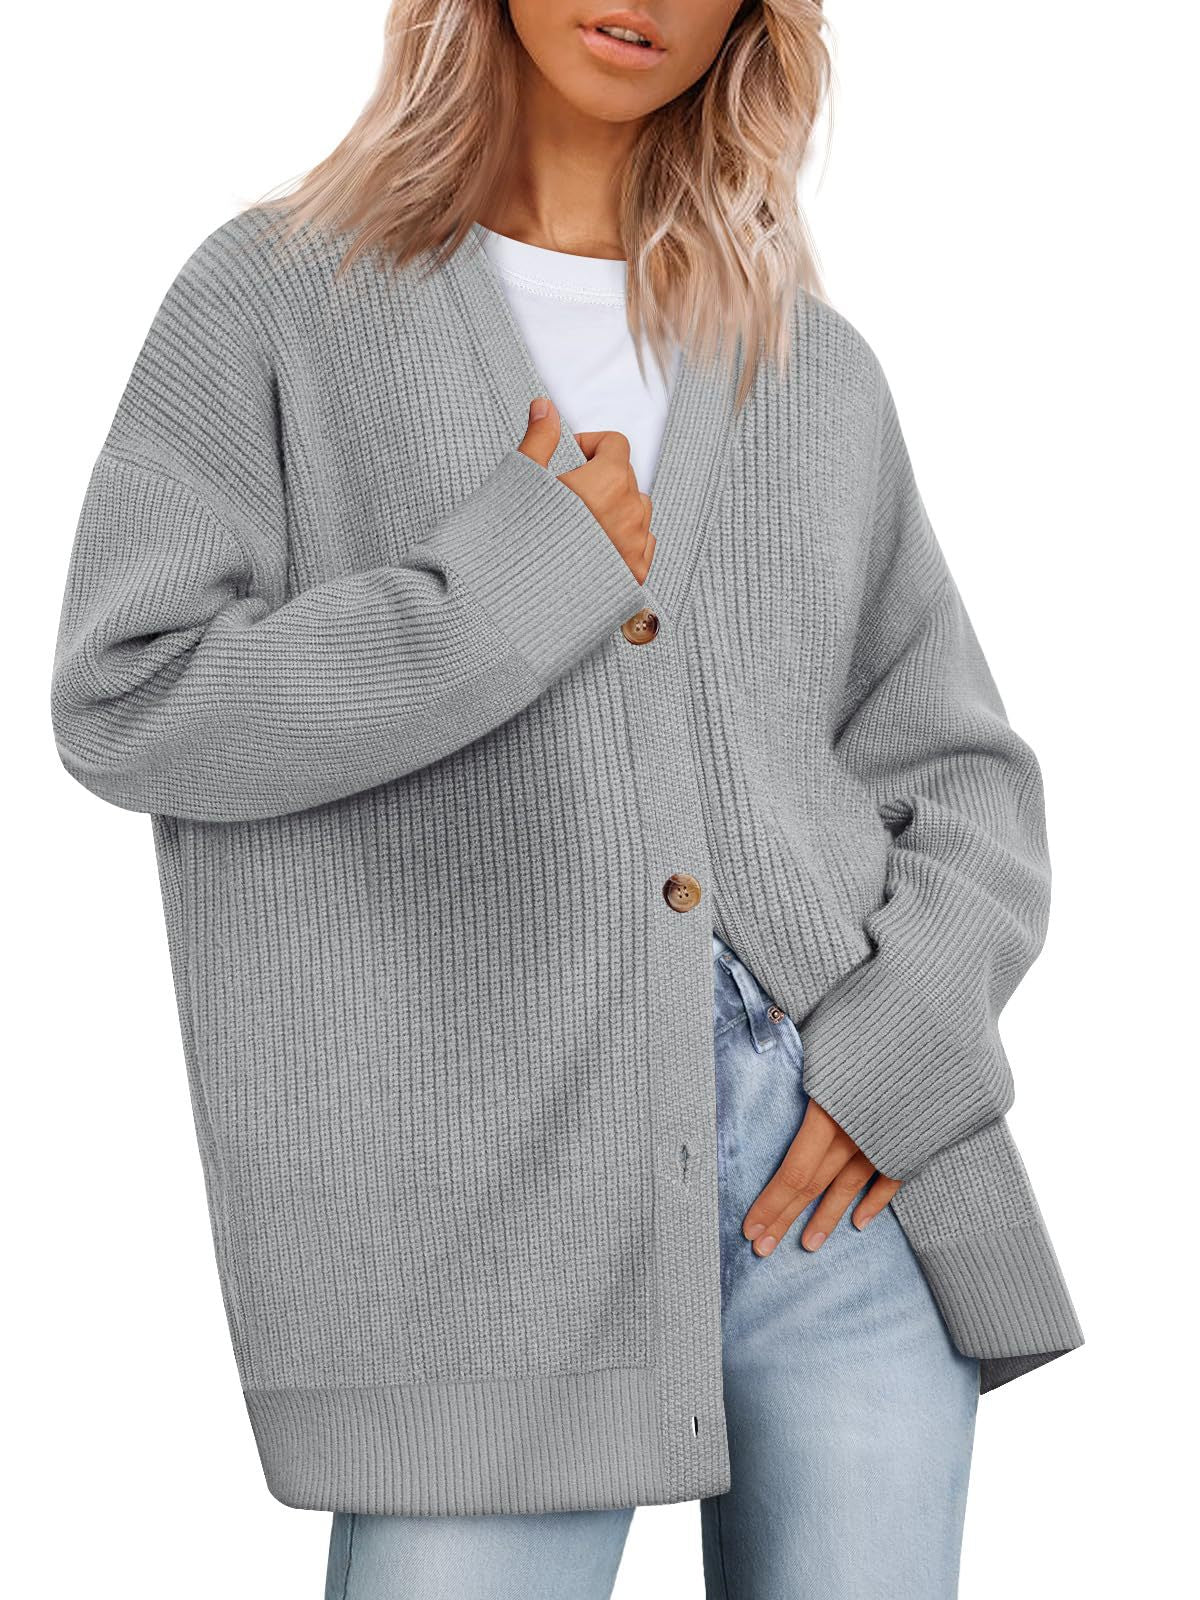 Casual Women Knitted Cardigan Sweaters